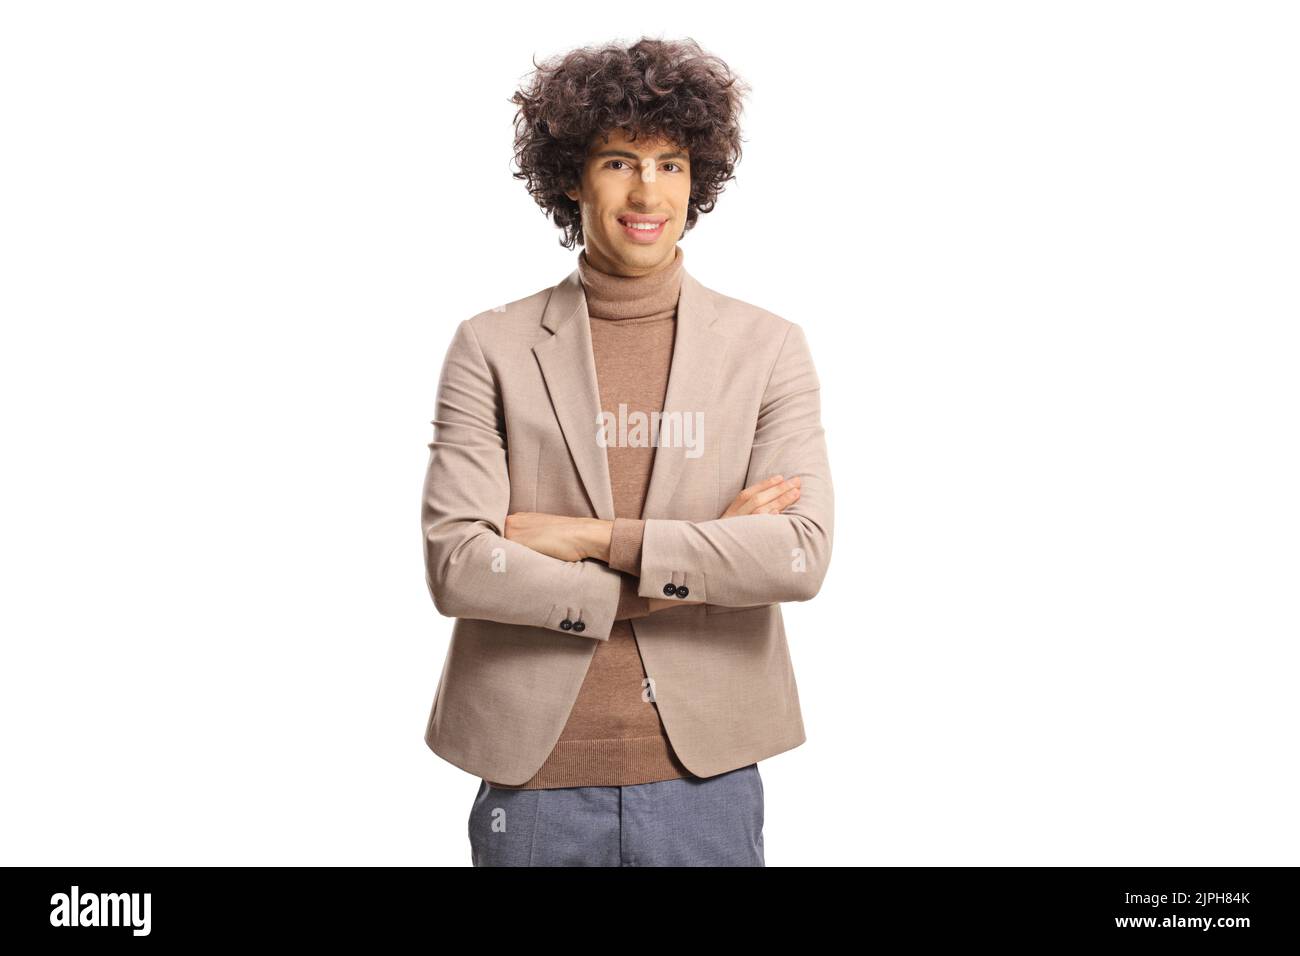 Young elegant man with a curly hair posing and smiling isolated on white background Stock Photo